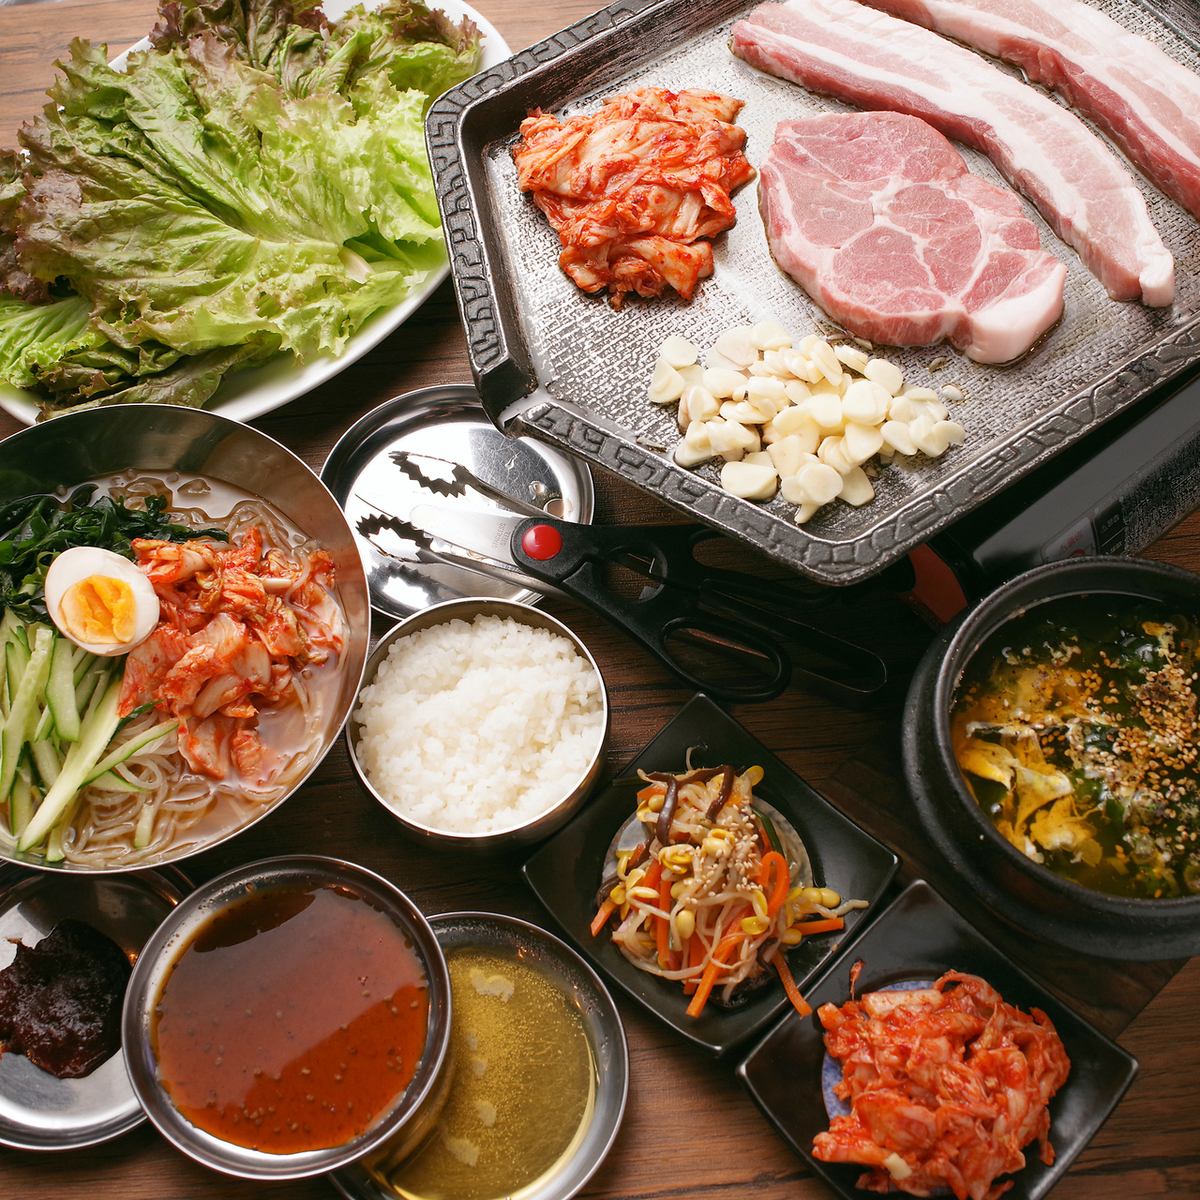 All-you-can-eat with your choice of main course! 2,999 yen including 120 minutes of all-you-can-drink★